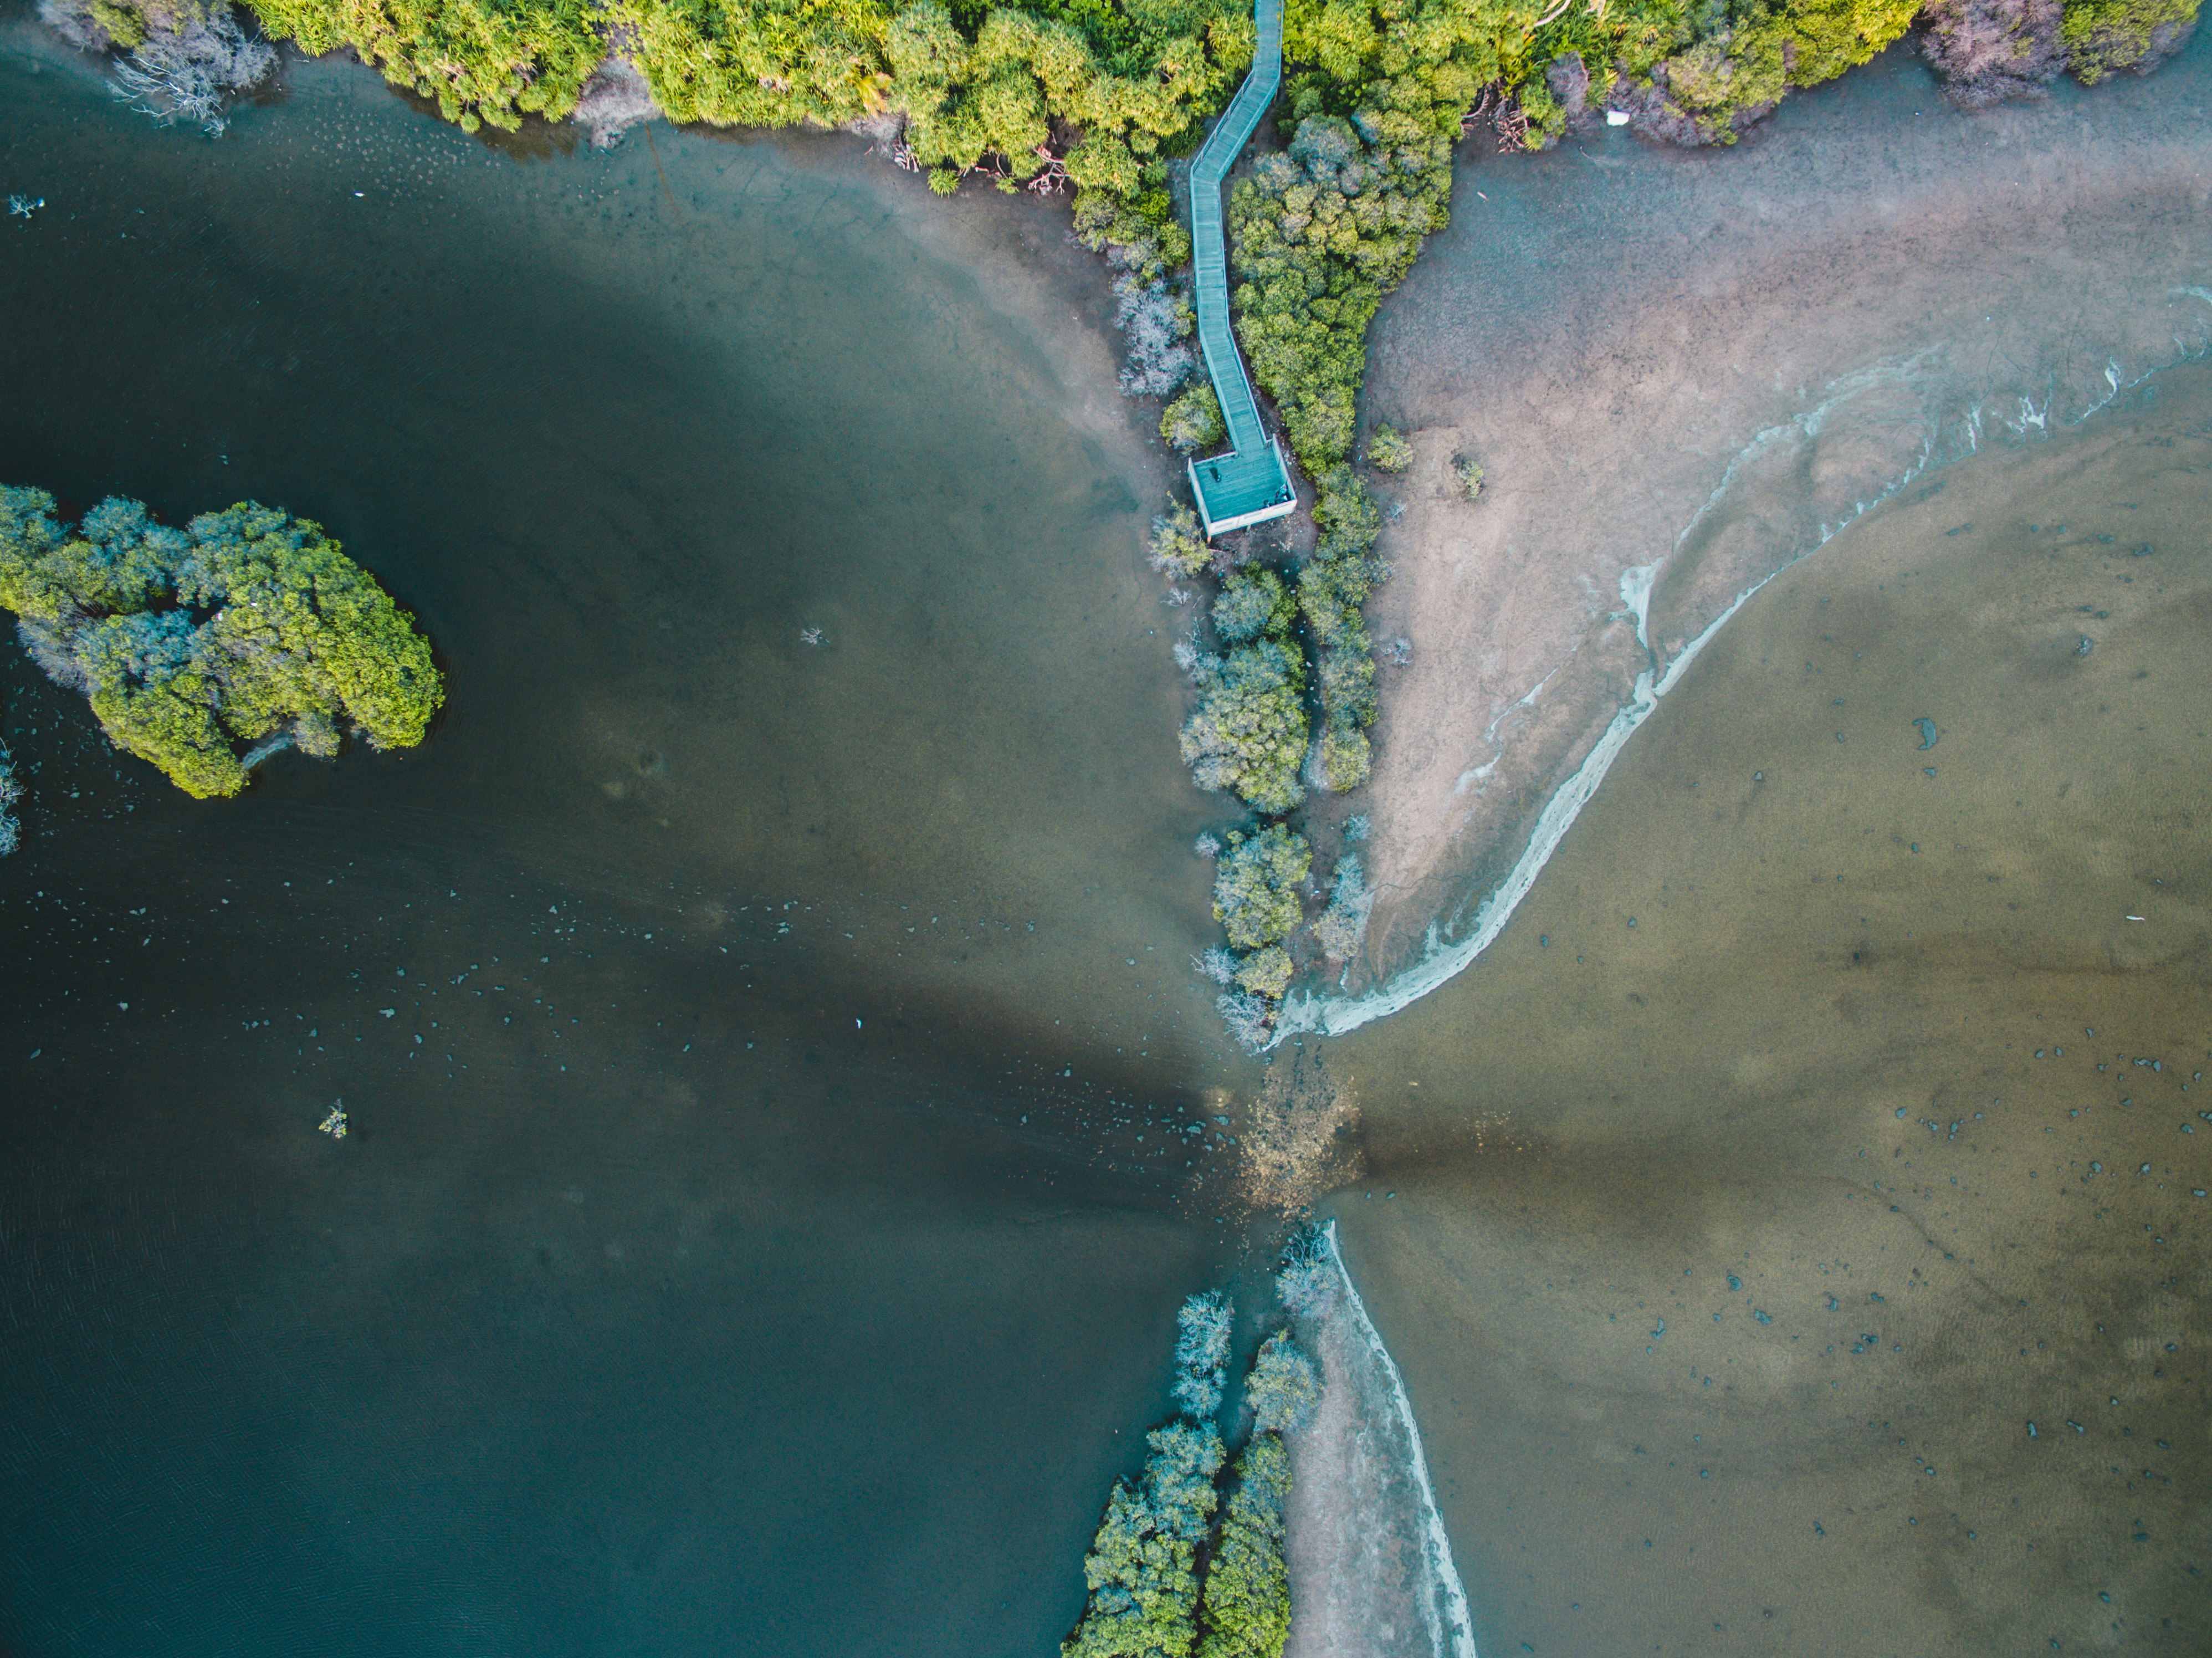 bird's-eye view of body of water and trees